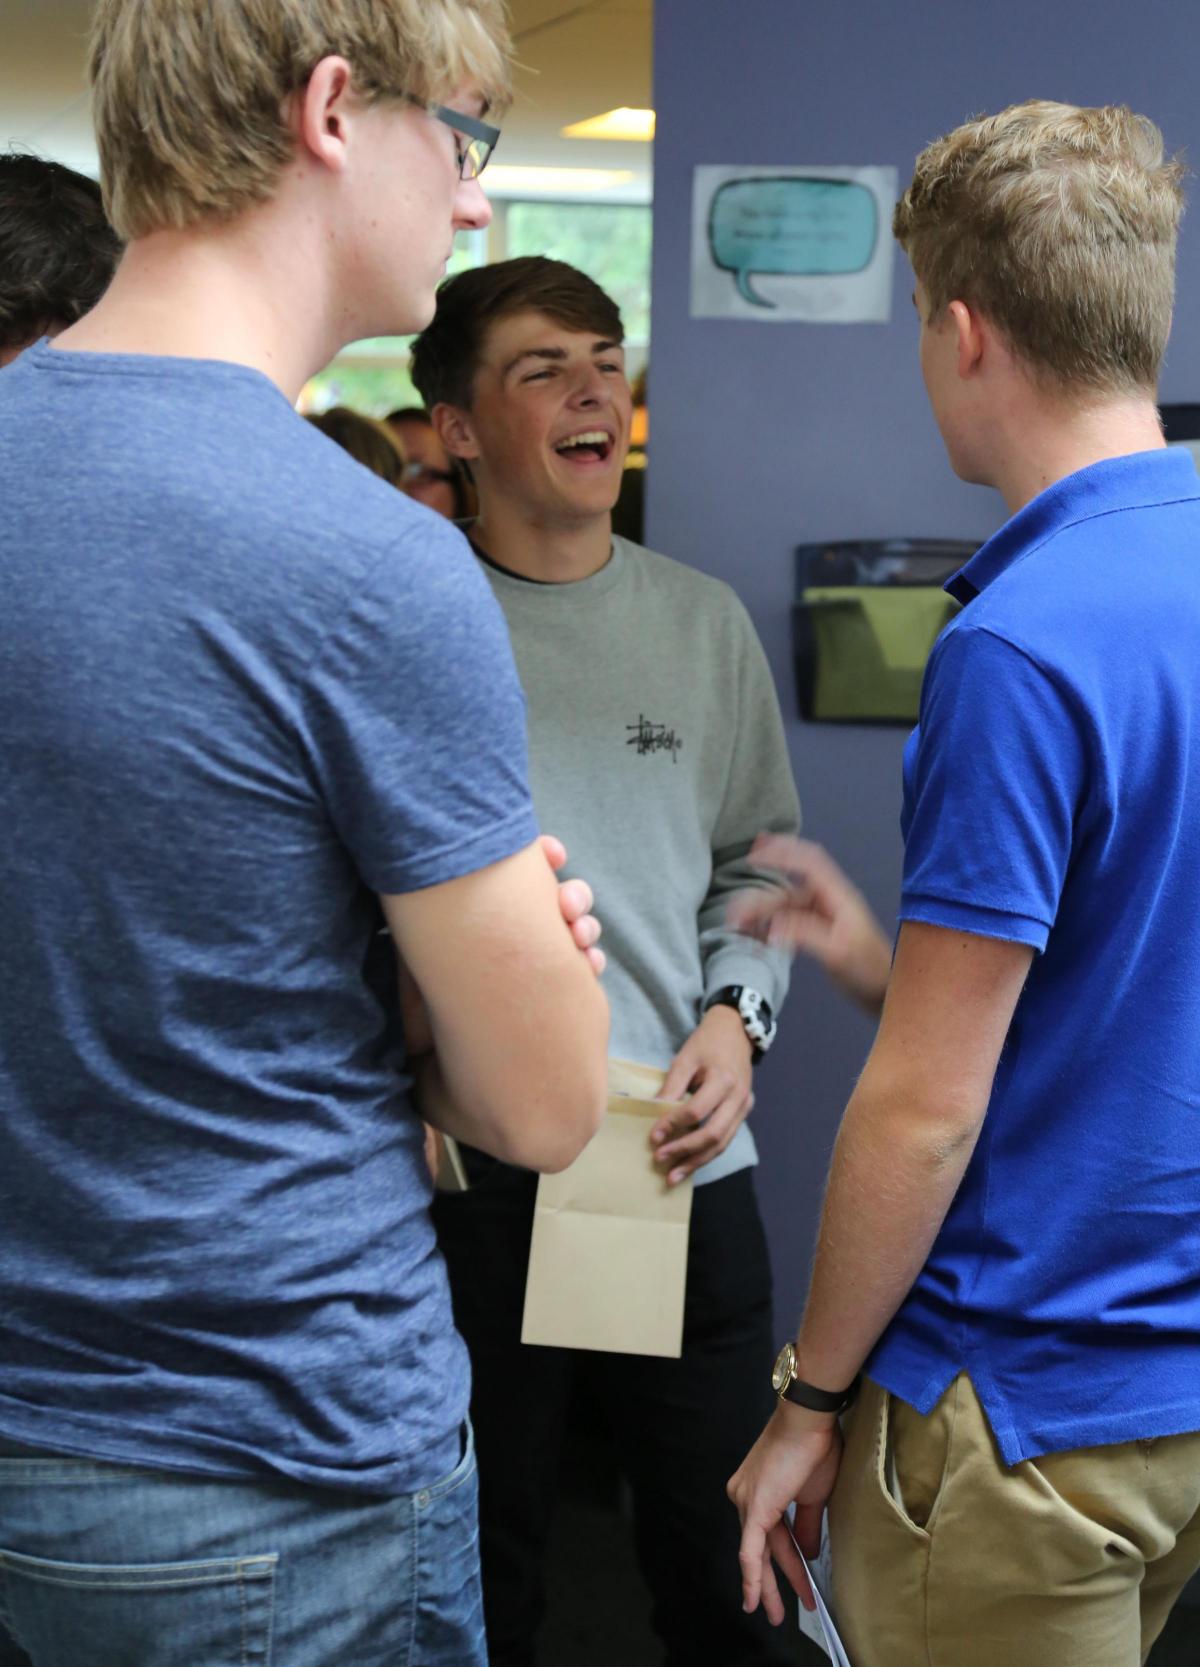 A Level results day 2014 at Poole High School